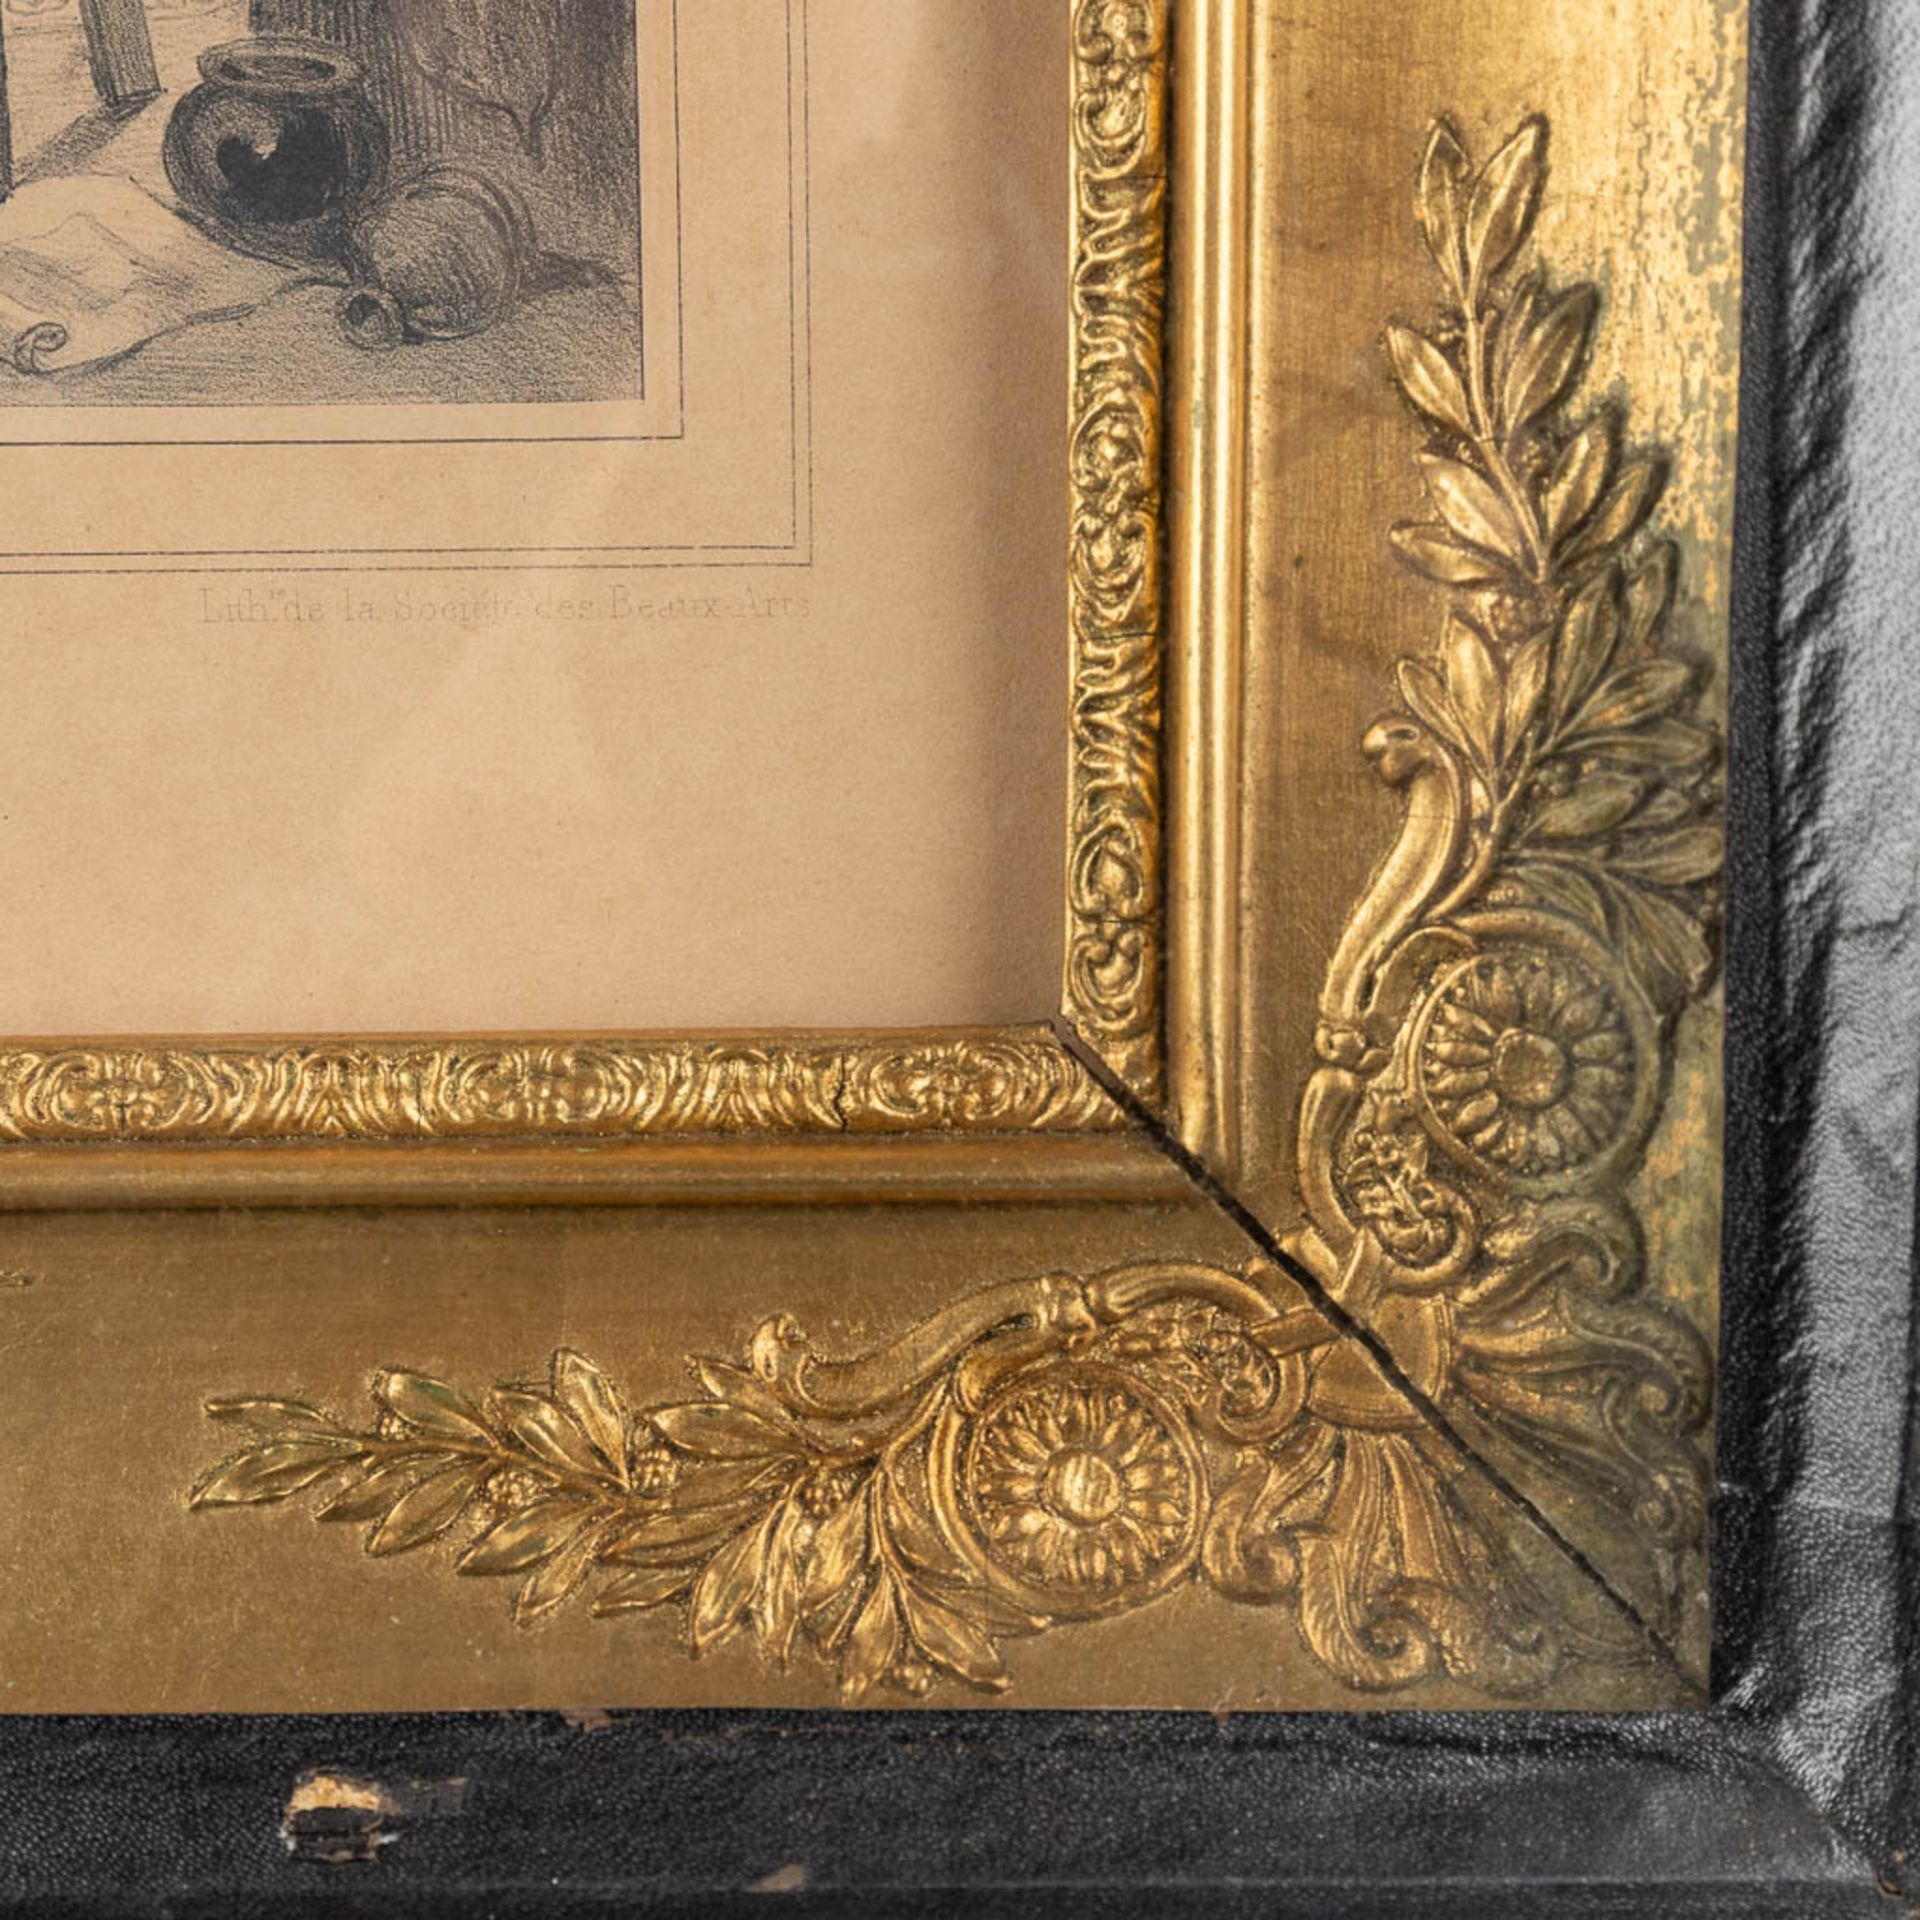 A pair of frames with lithographies, framed in an empire frame. 19th C. (W:59 x H:49 cm) - Bild 17 aus 21